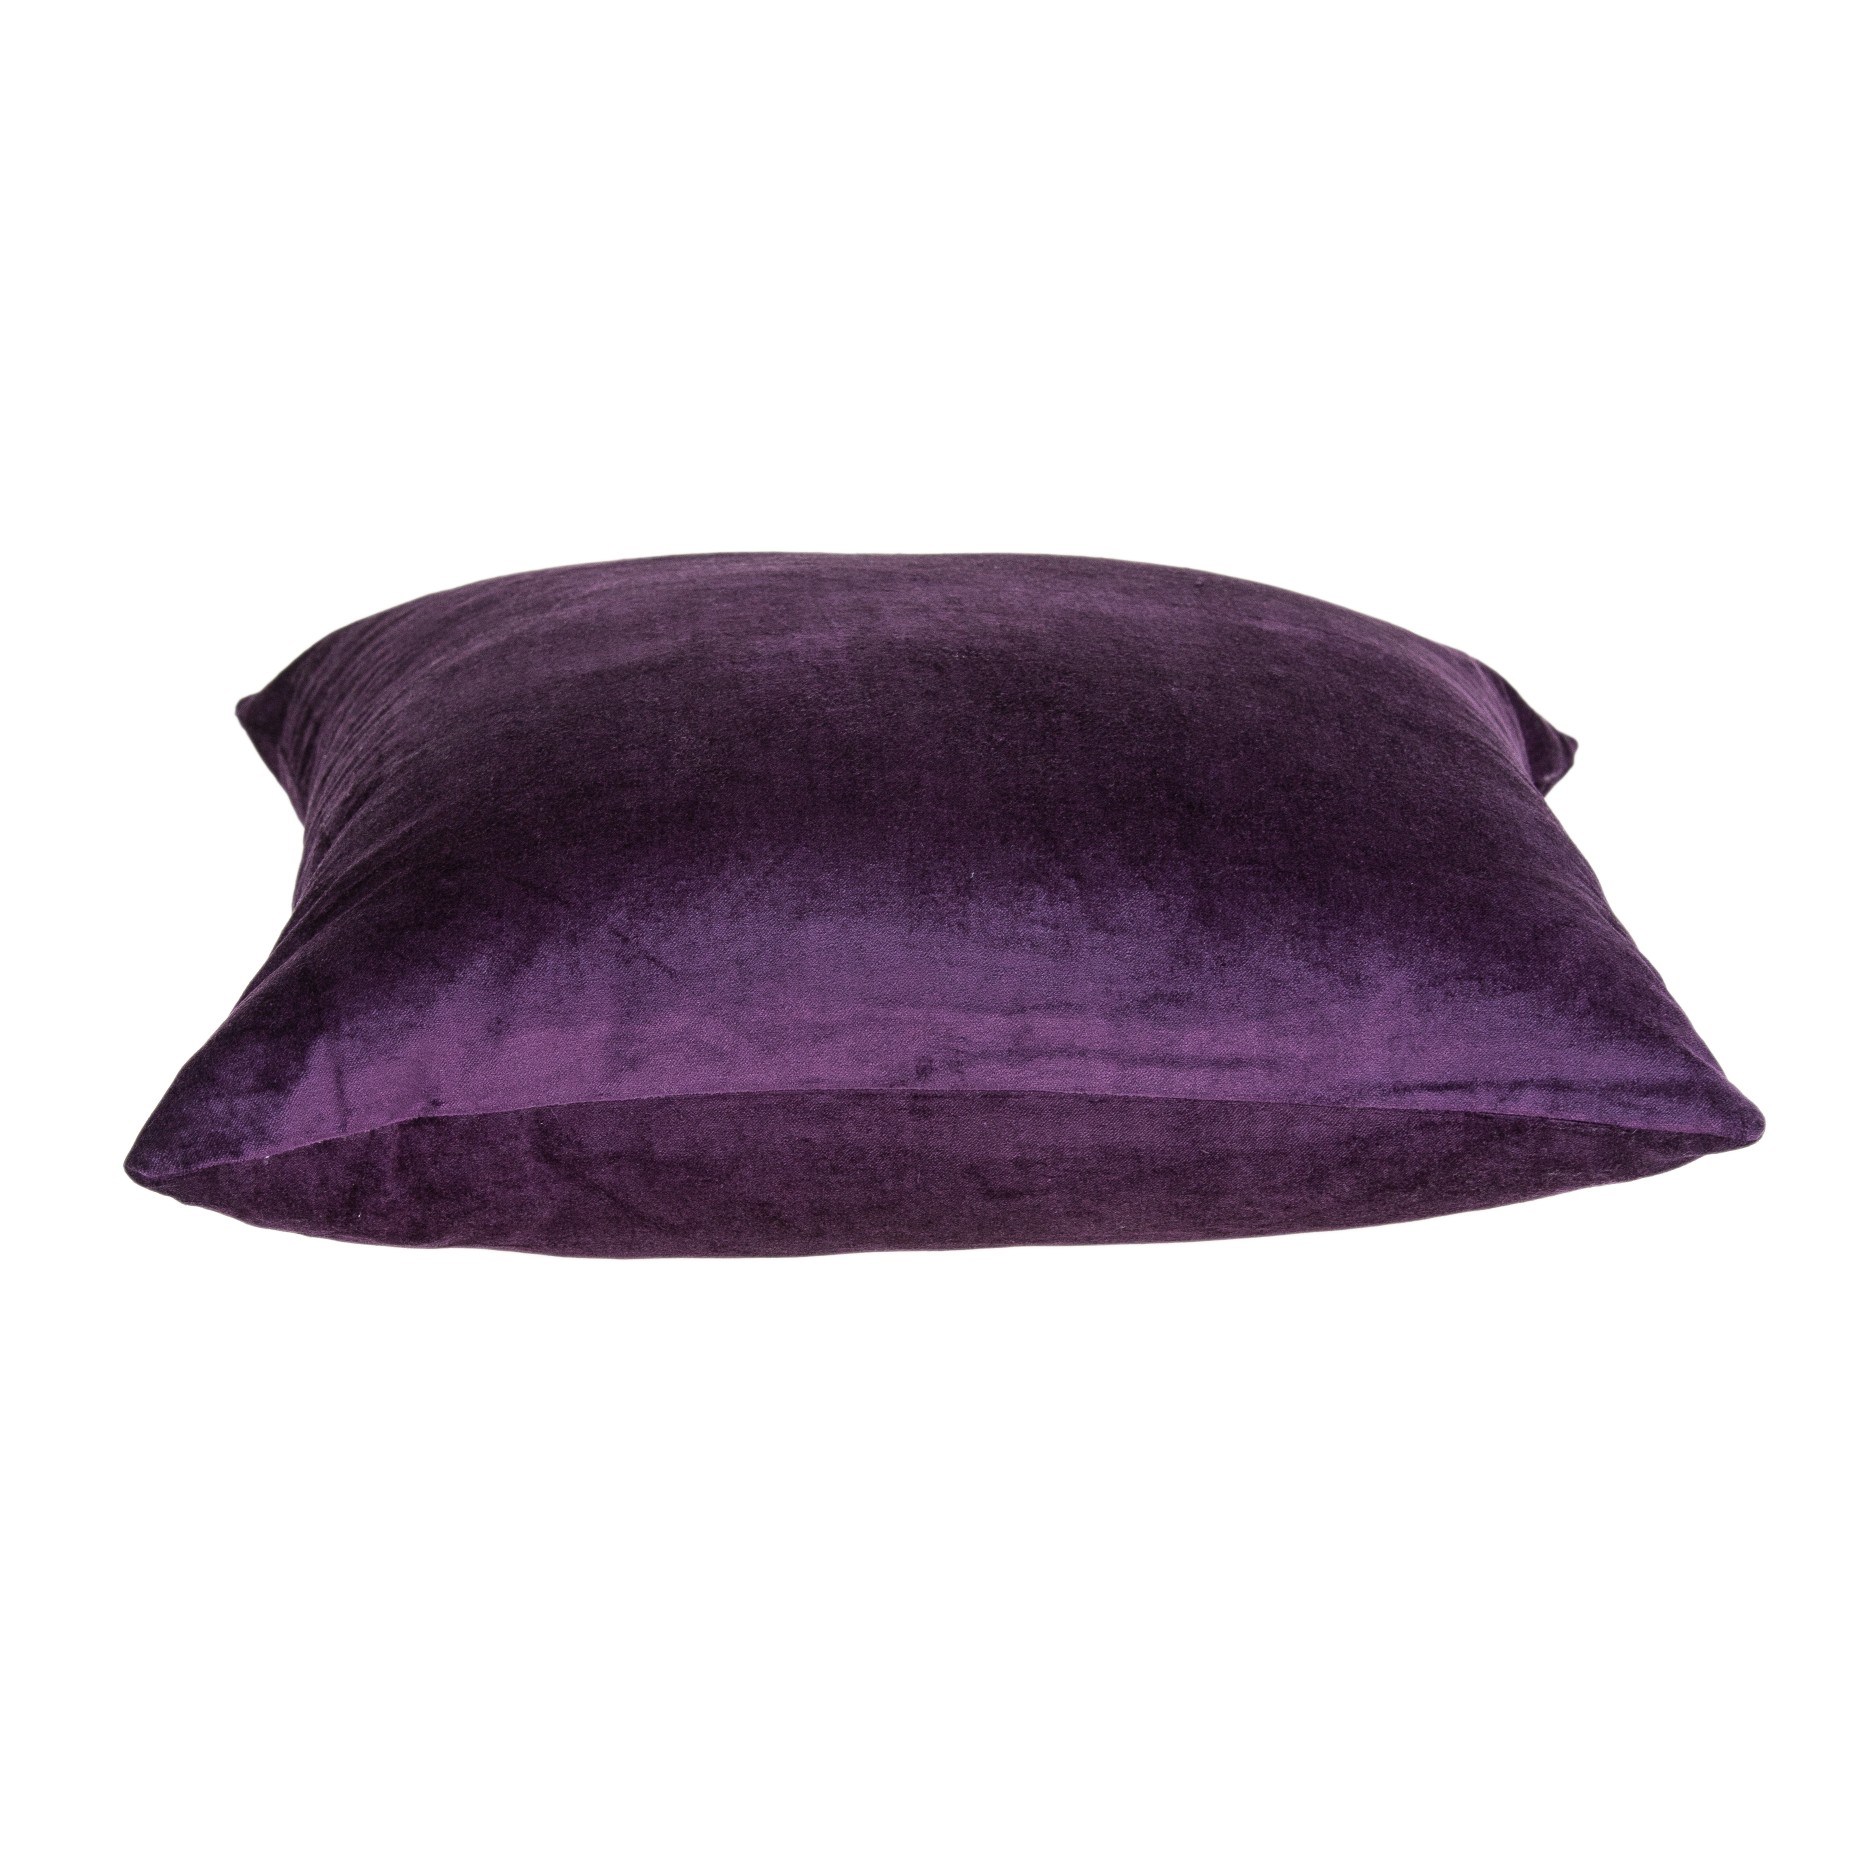 18" x 7" x 18" Transitional Purple Solid Pillow Cover With Down Insert